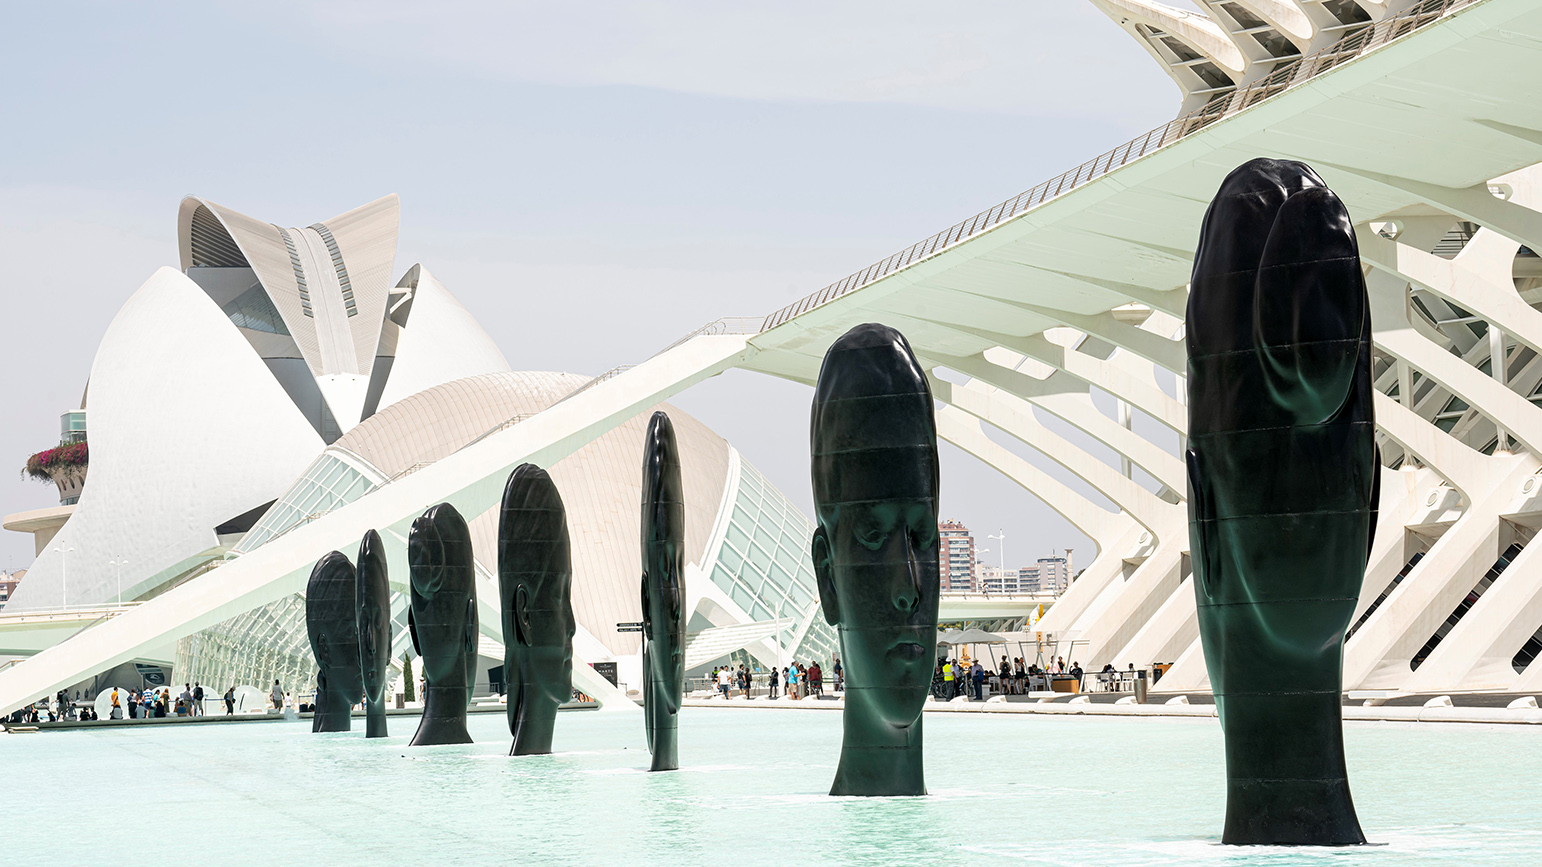 Seven large flat sculptures of serene faces installed in a shallow pool of water